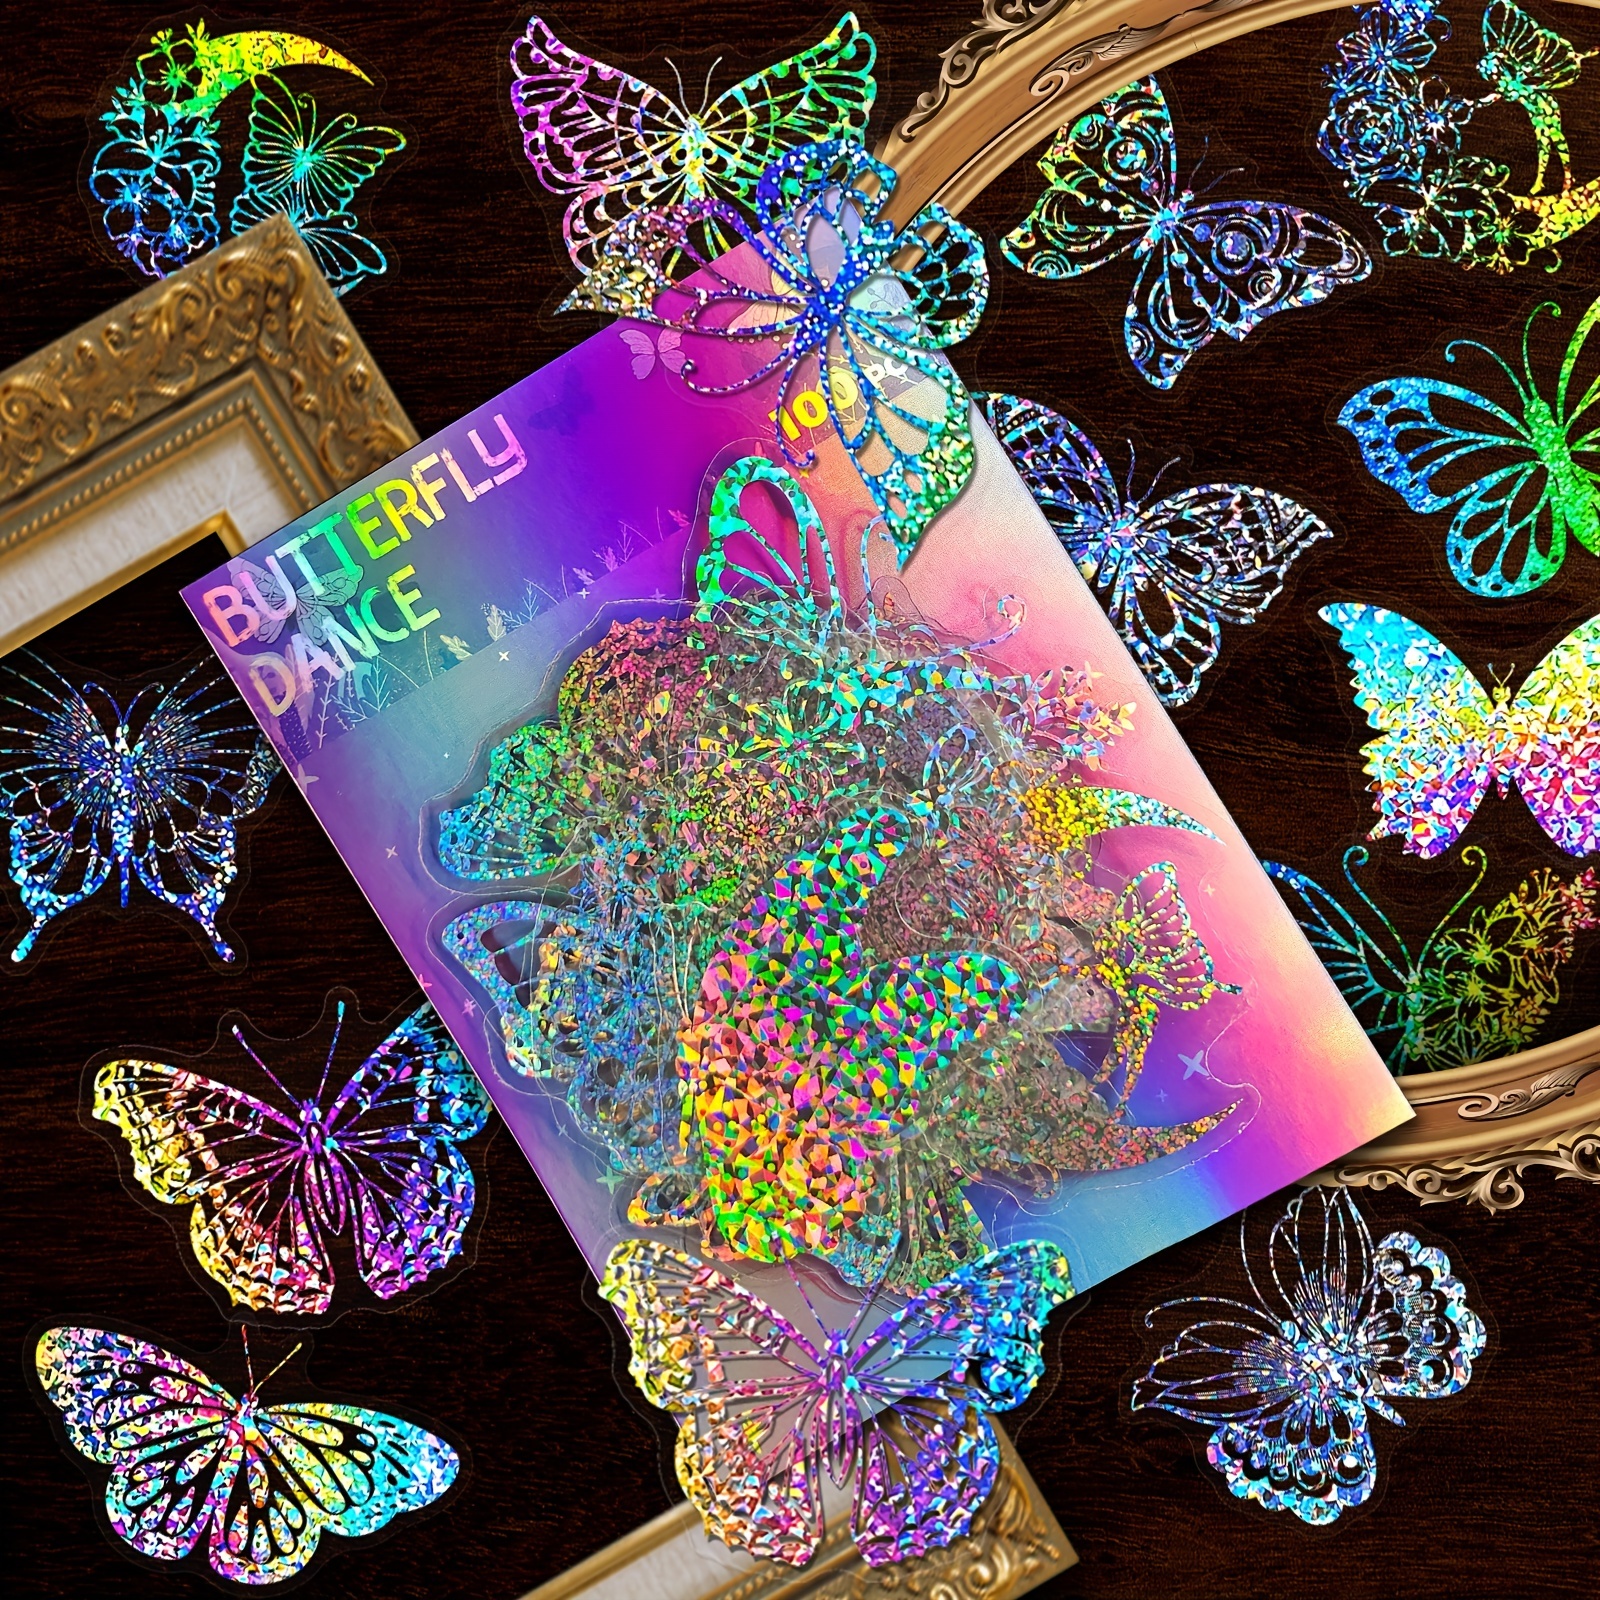 Shiny Holographic Stickers - Resin Transparent Stickers for Scrapbook Craft